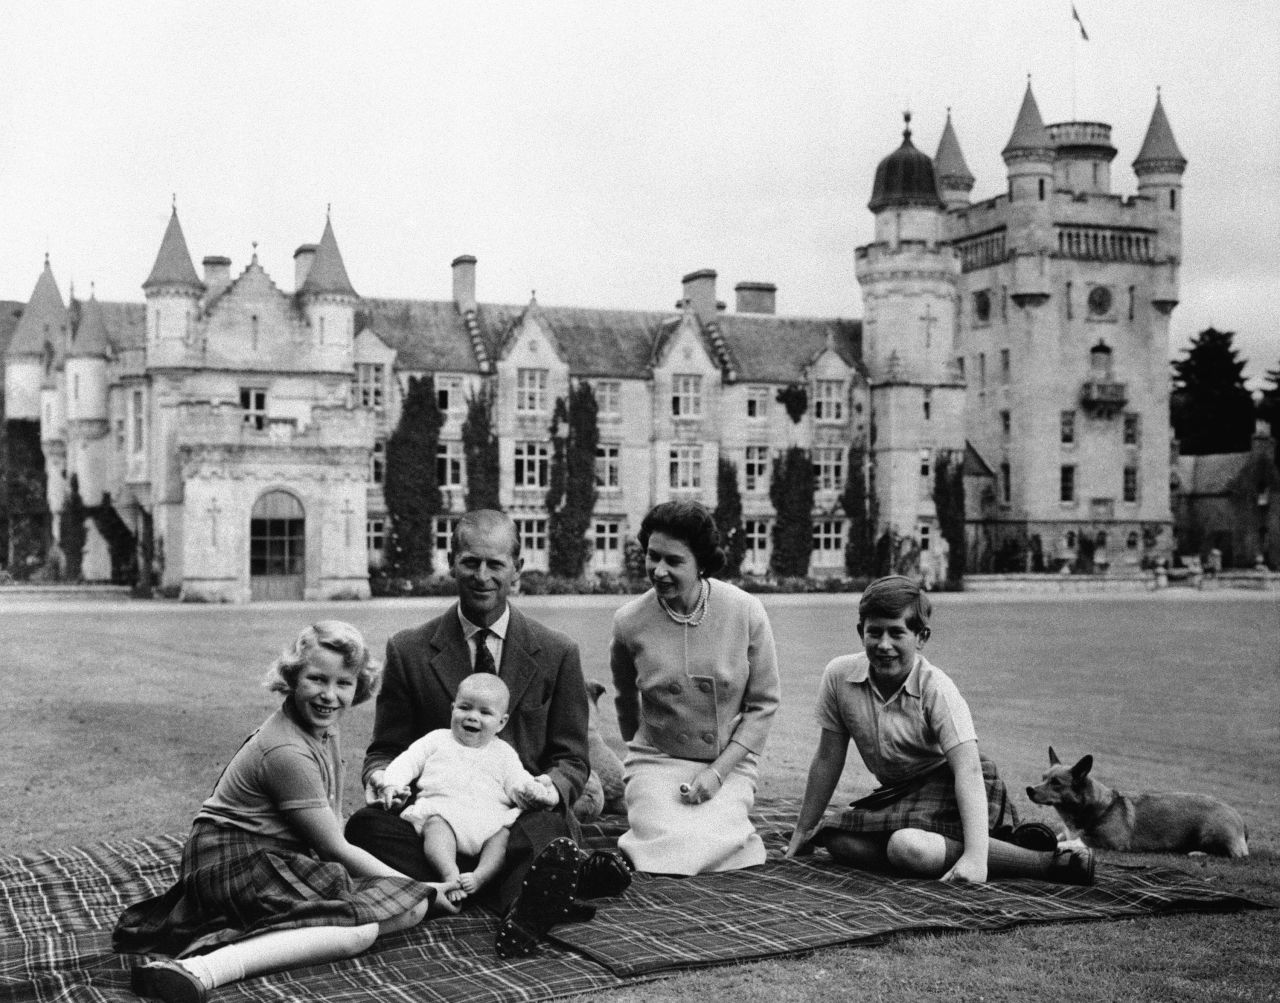 Prince Andrew sits on his father's lap during a holiday in Scotland in September 1960. At left is his sister, Princess Anne. At right, next to the Queen, is his brother Prince Charles.